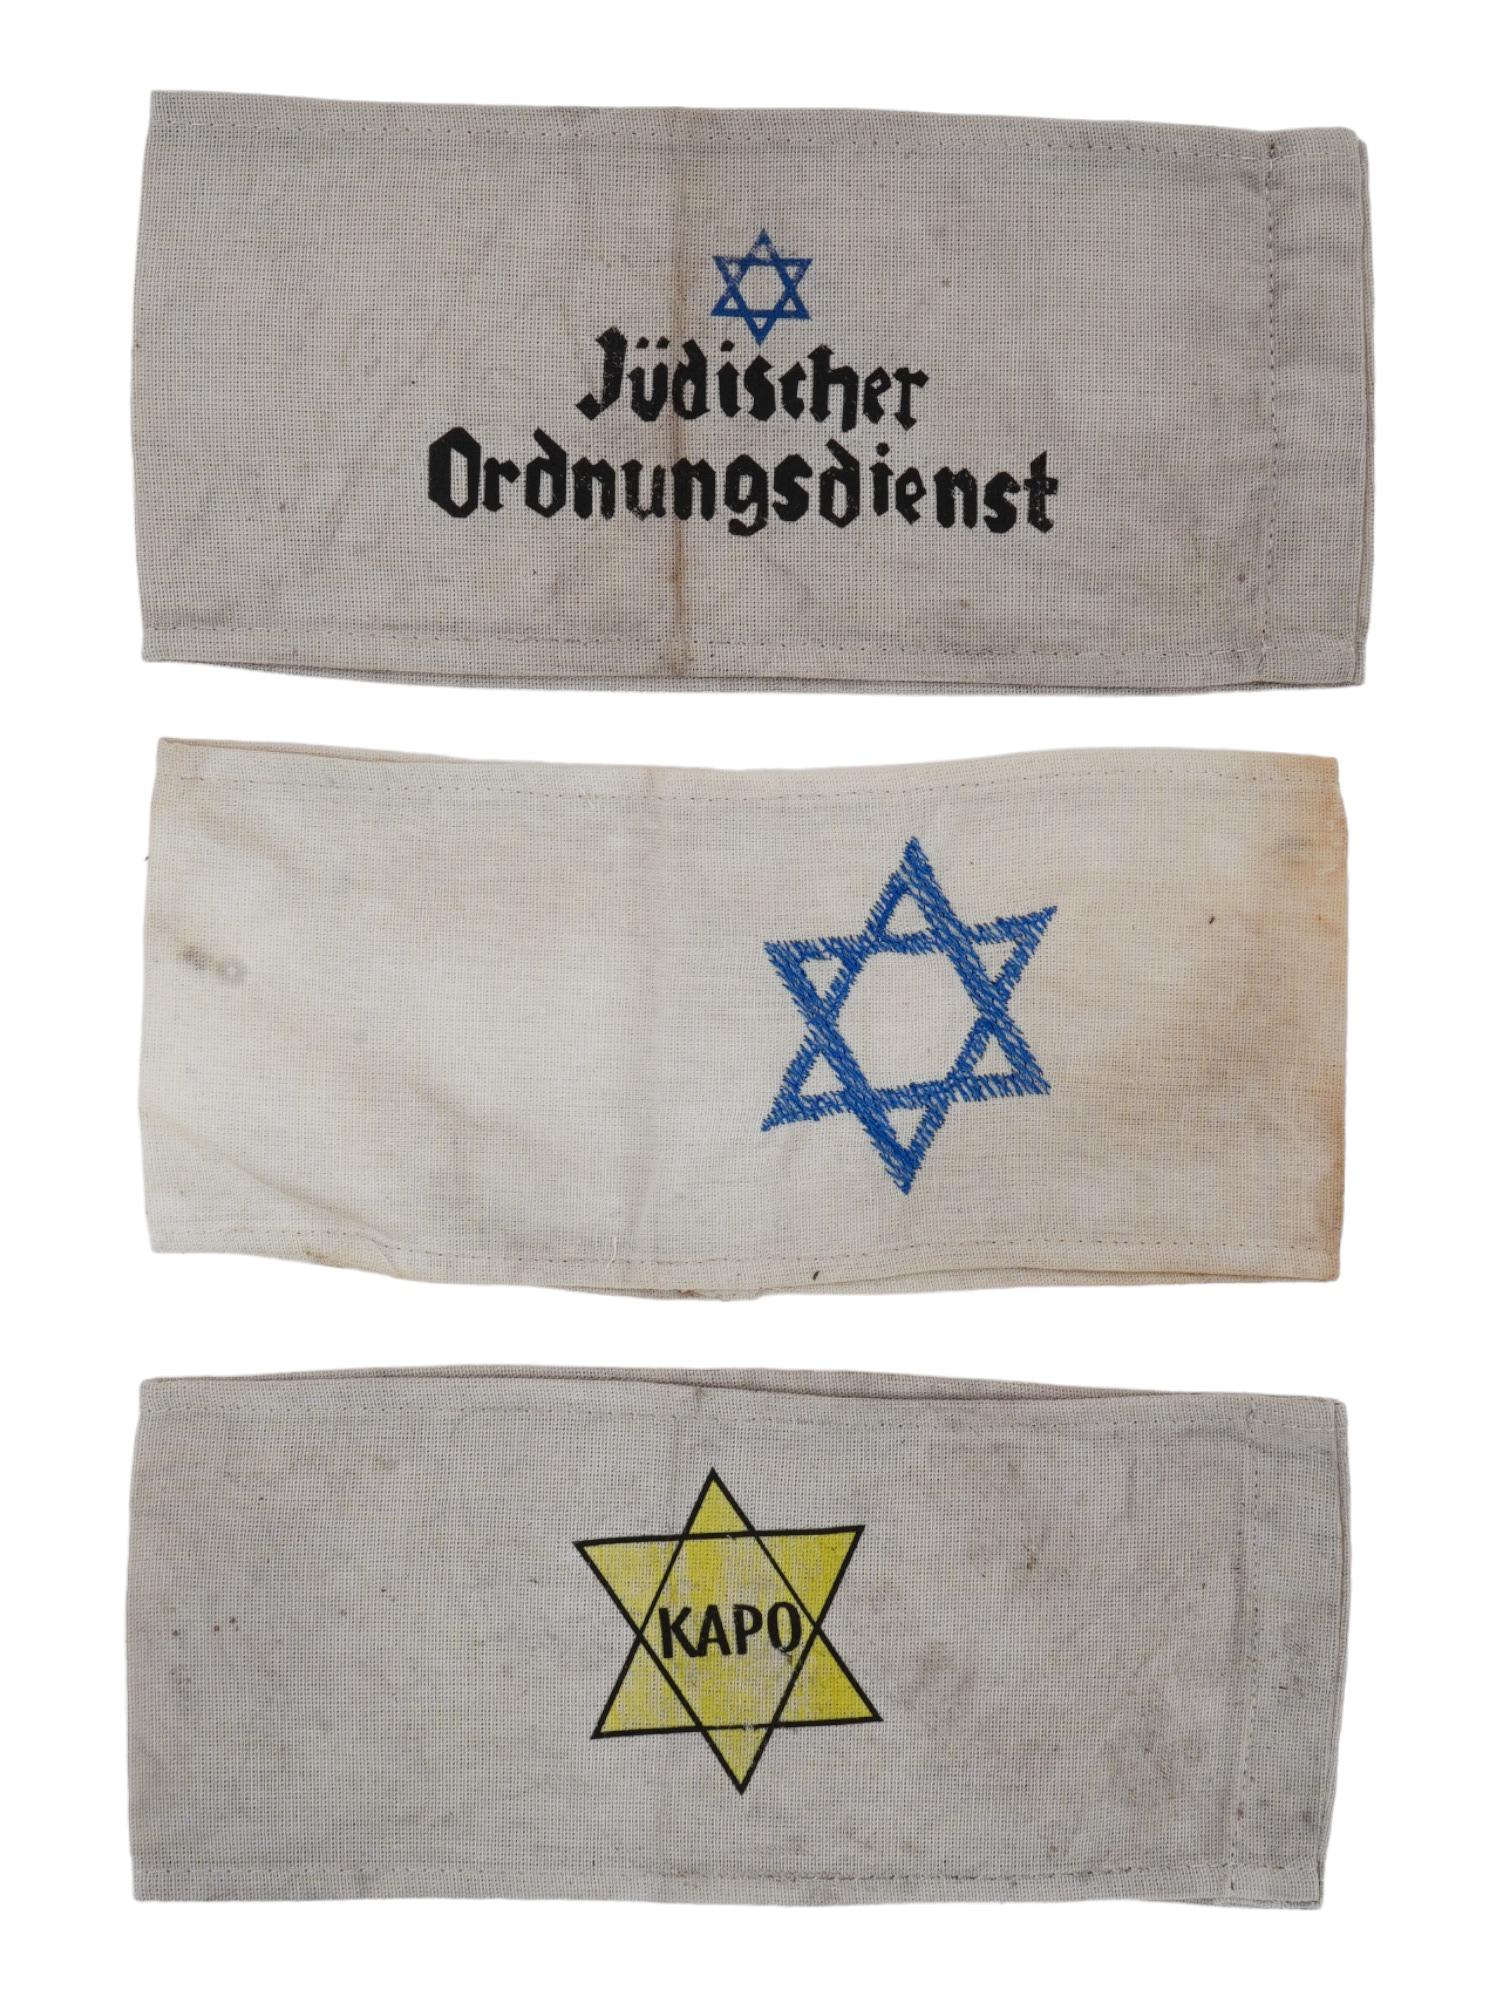 GROUP OF 3 HOLOCAUST PERIOD ARMBANDS PIC-0